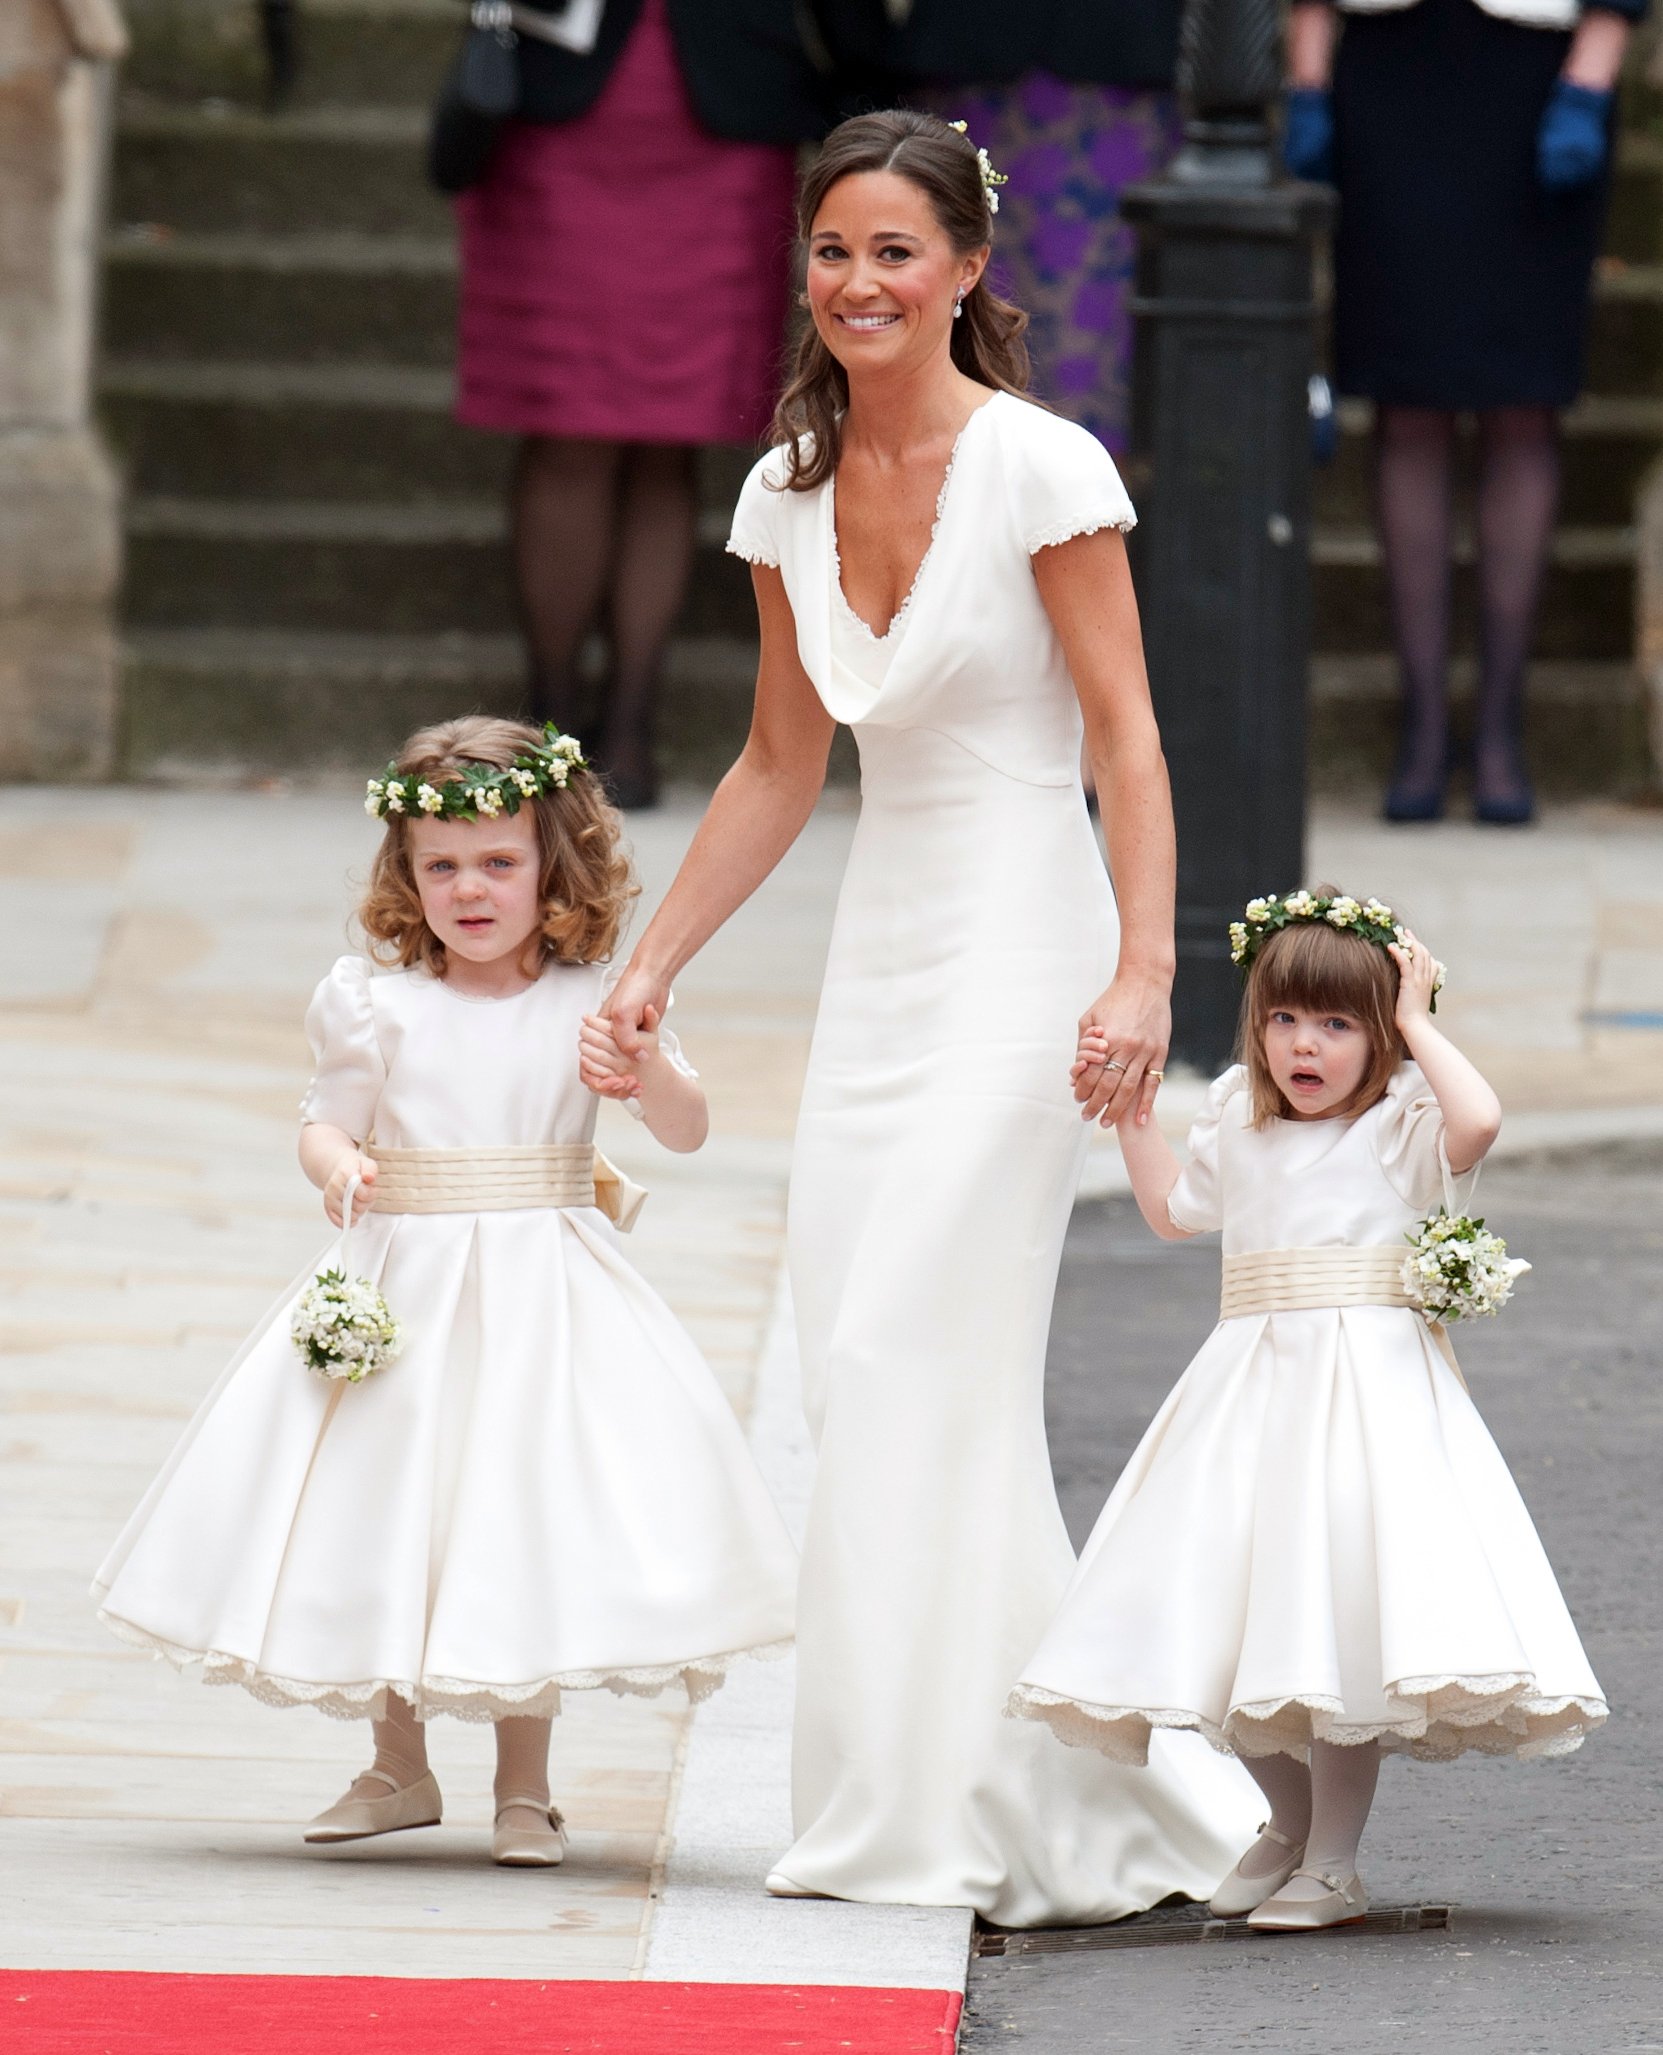 Page boys and bridesmaids arrive at Westminster Abbey escorted by Pippa Middleton before Kate Middleton and Prince William's wedding ceremony in London┃Source: Getty Images